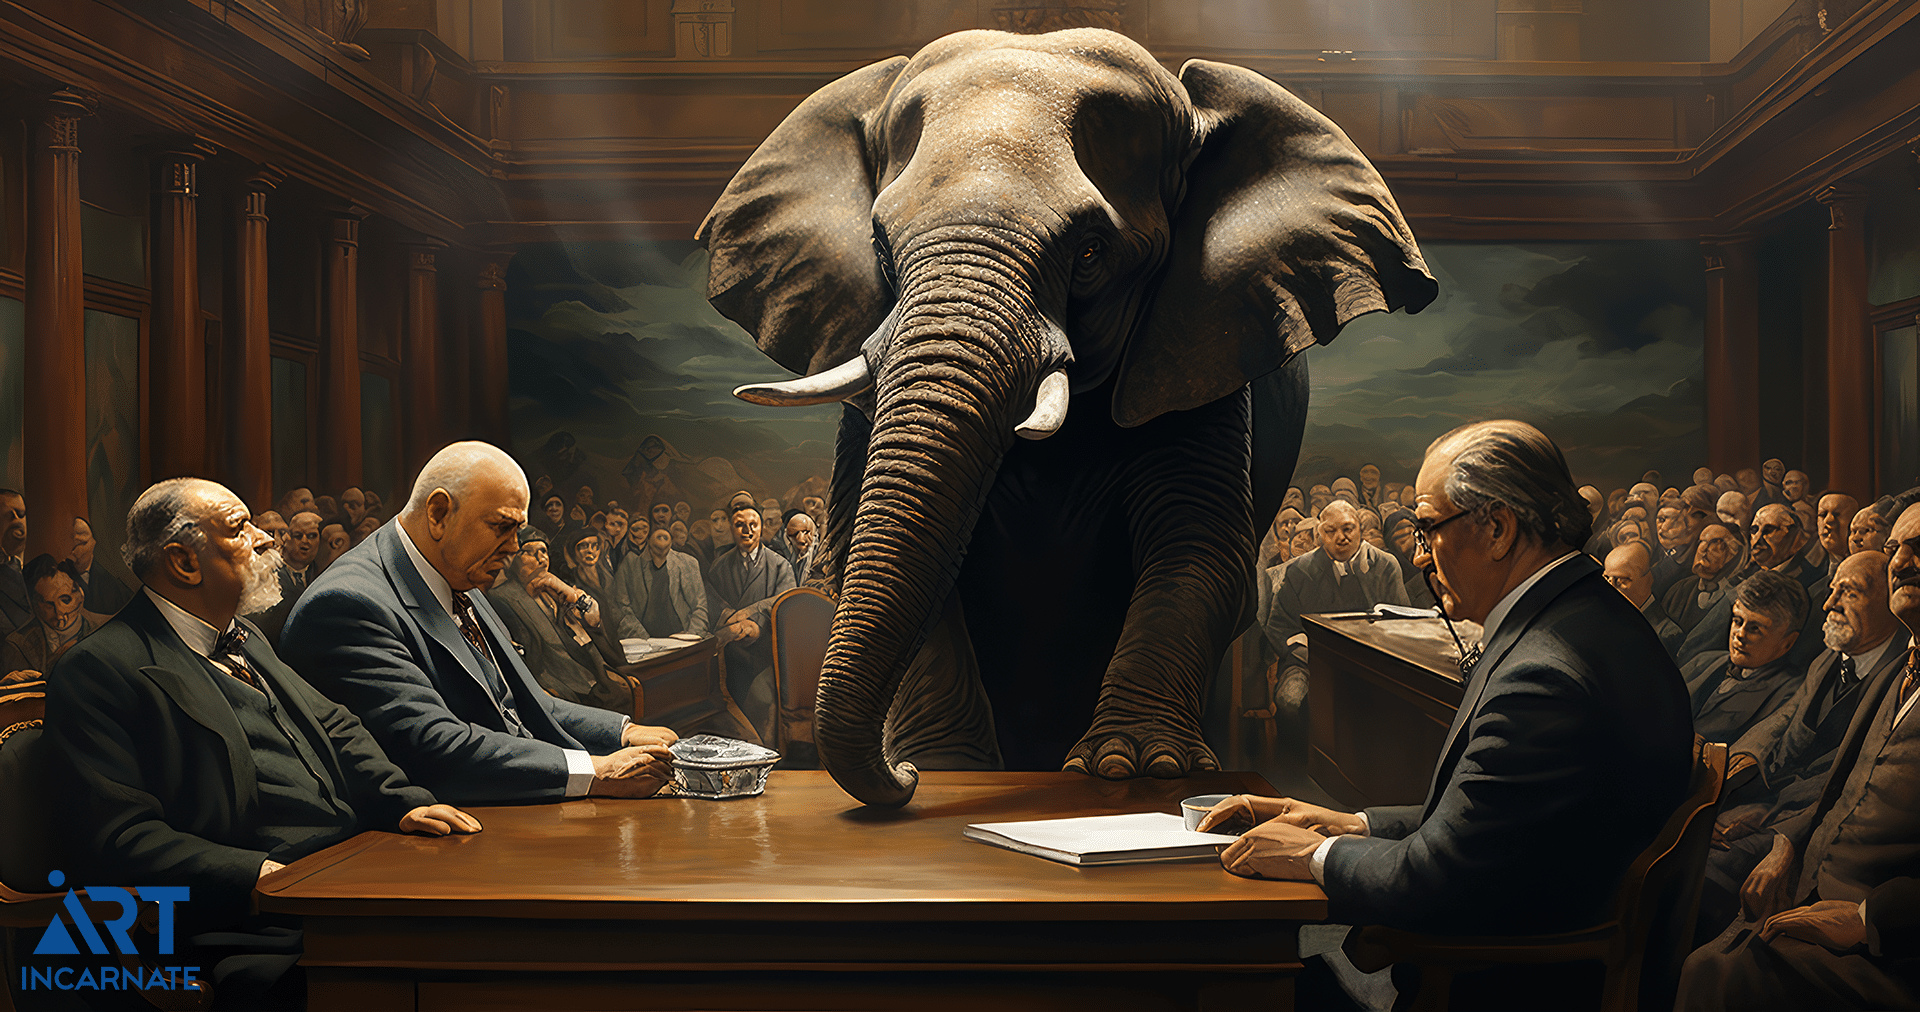 An image of an elephant standing in a courtroom packed with people arguing about copyright